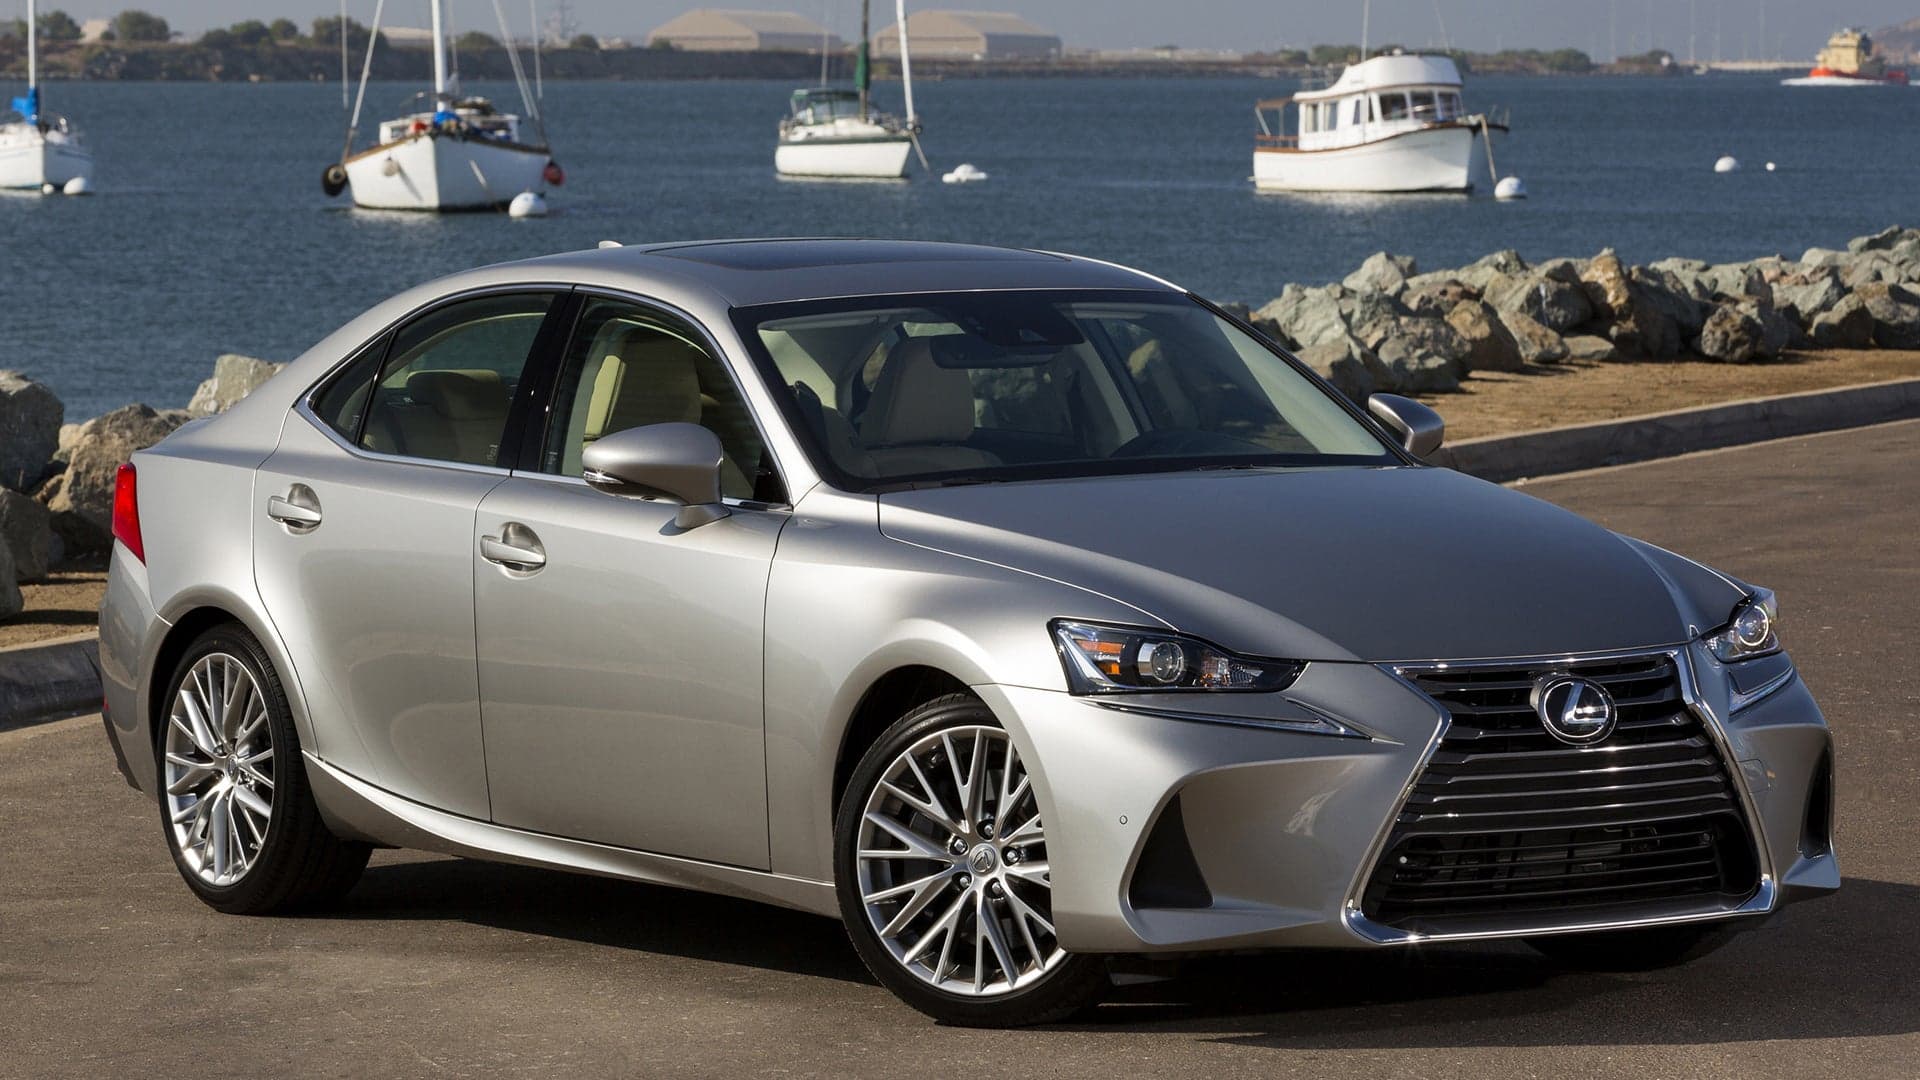 2017 Lexus IS200t Is the Pick of the Entry-Level Lexus Lineup